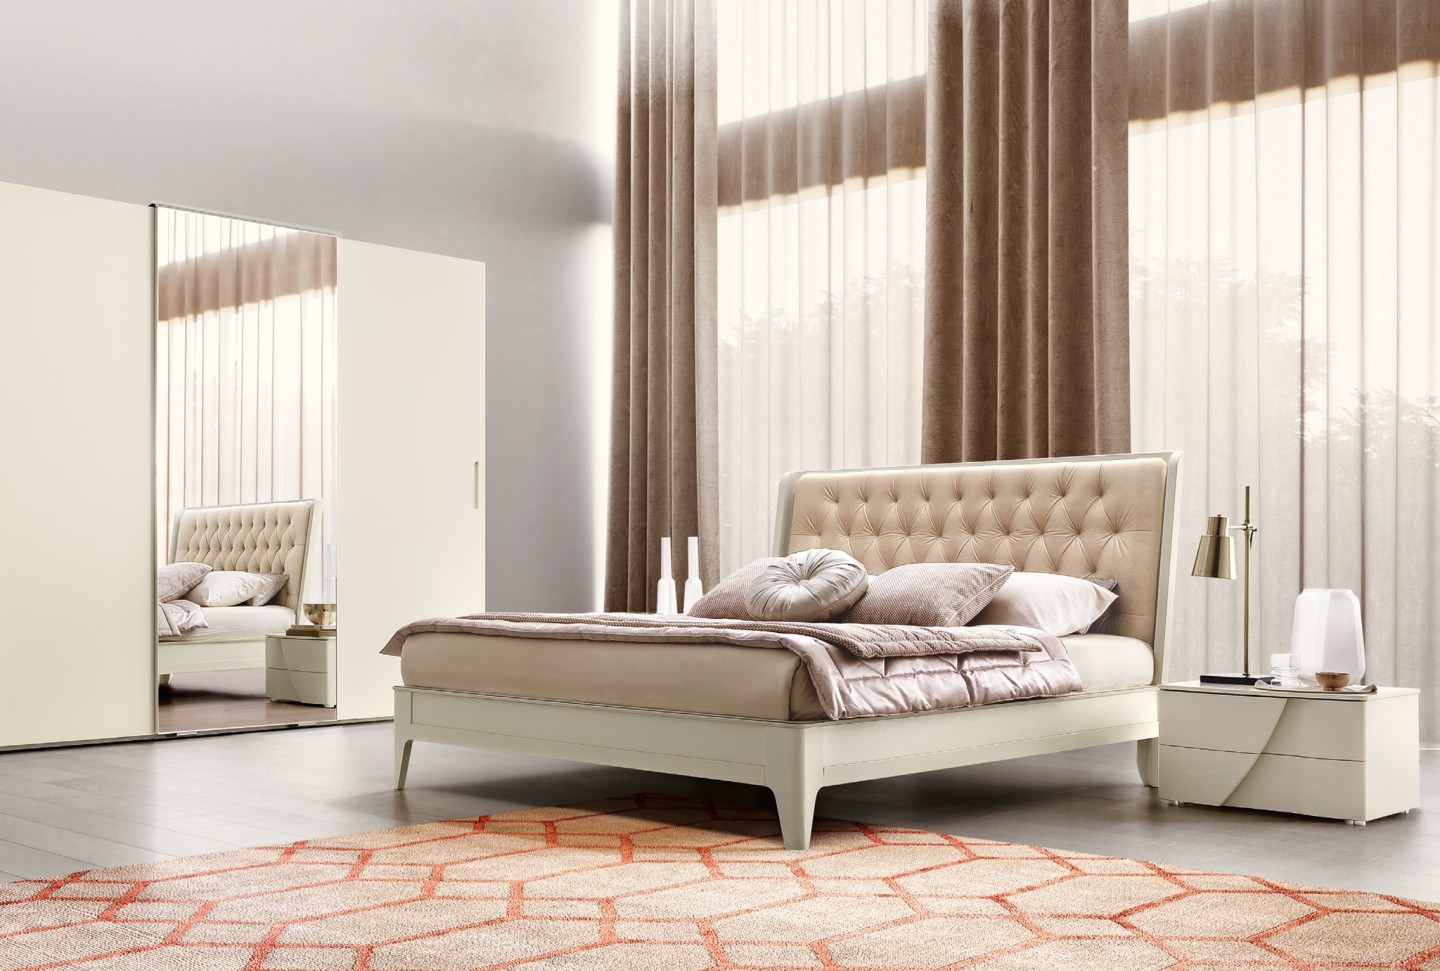 THE GIOTTO CLASSIC BEDROOM